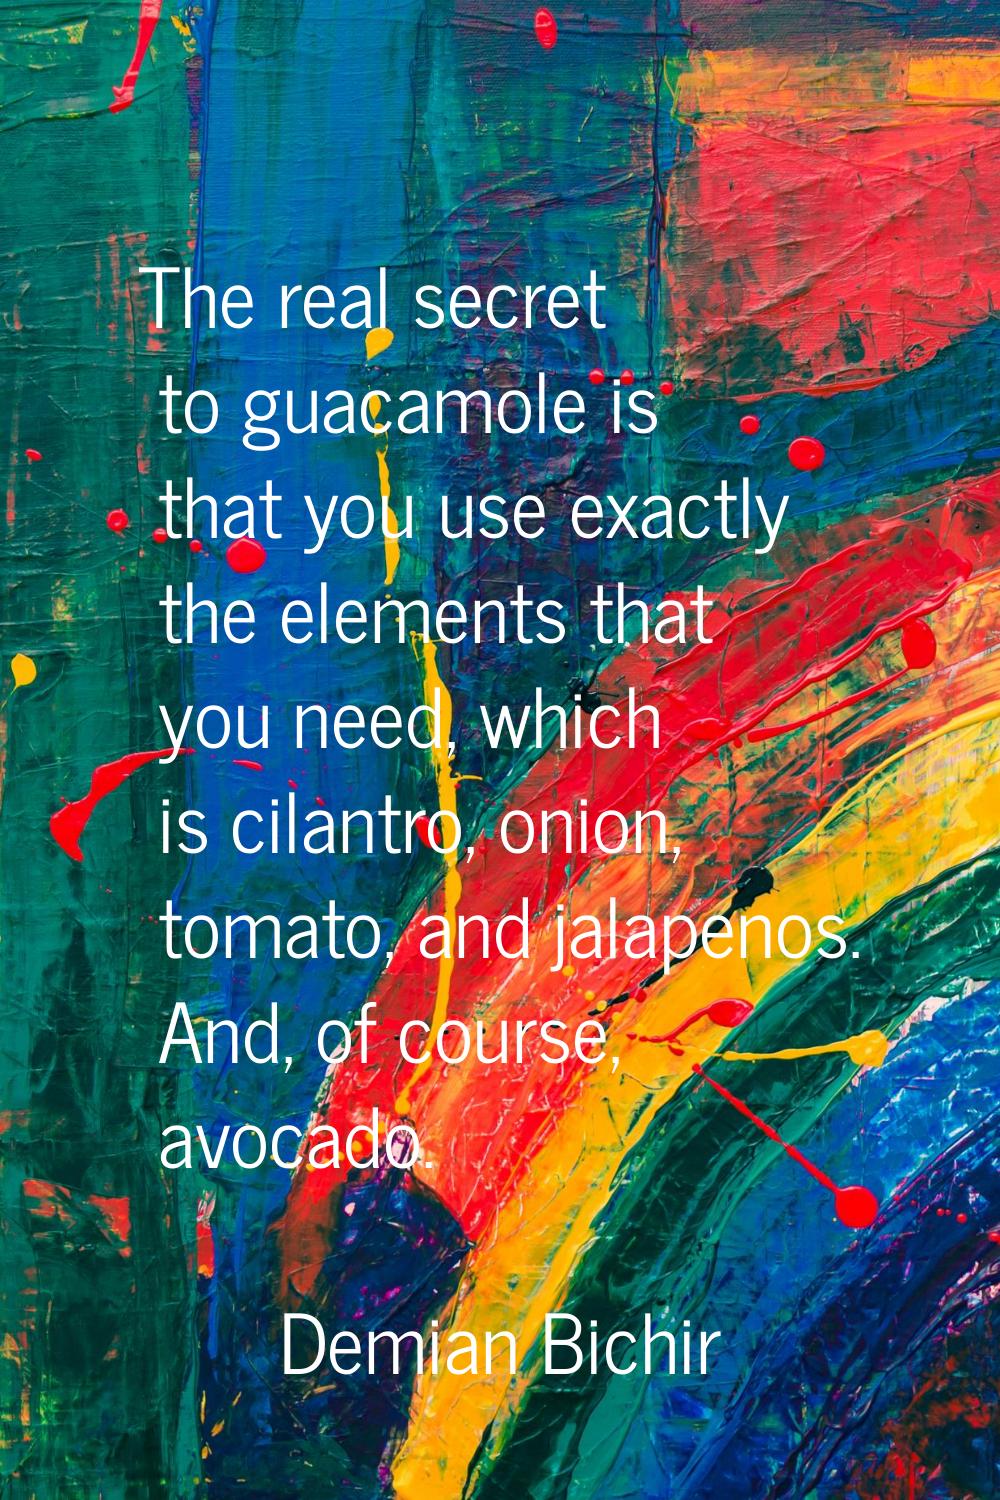 The real secret to guacamole is that you use exactly the elements that you need, which is cilantro,